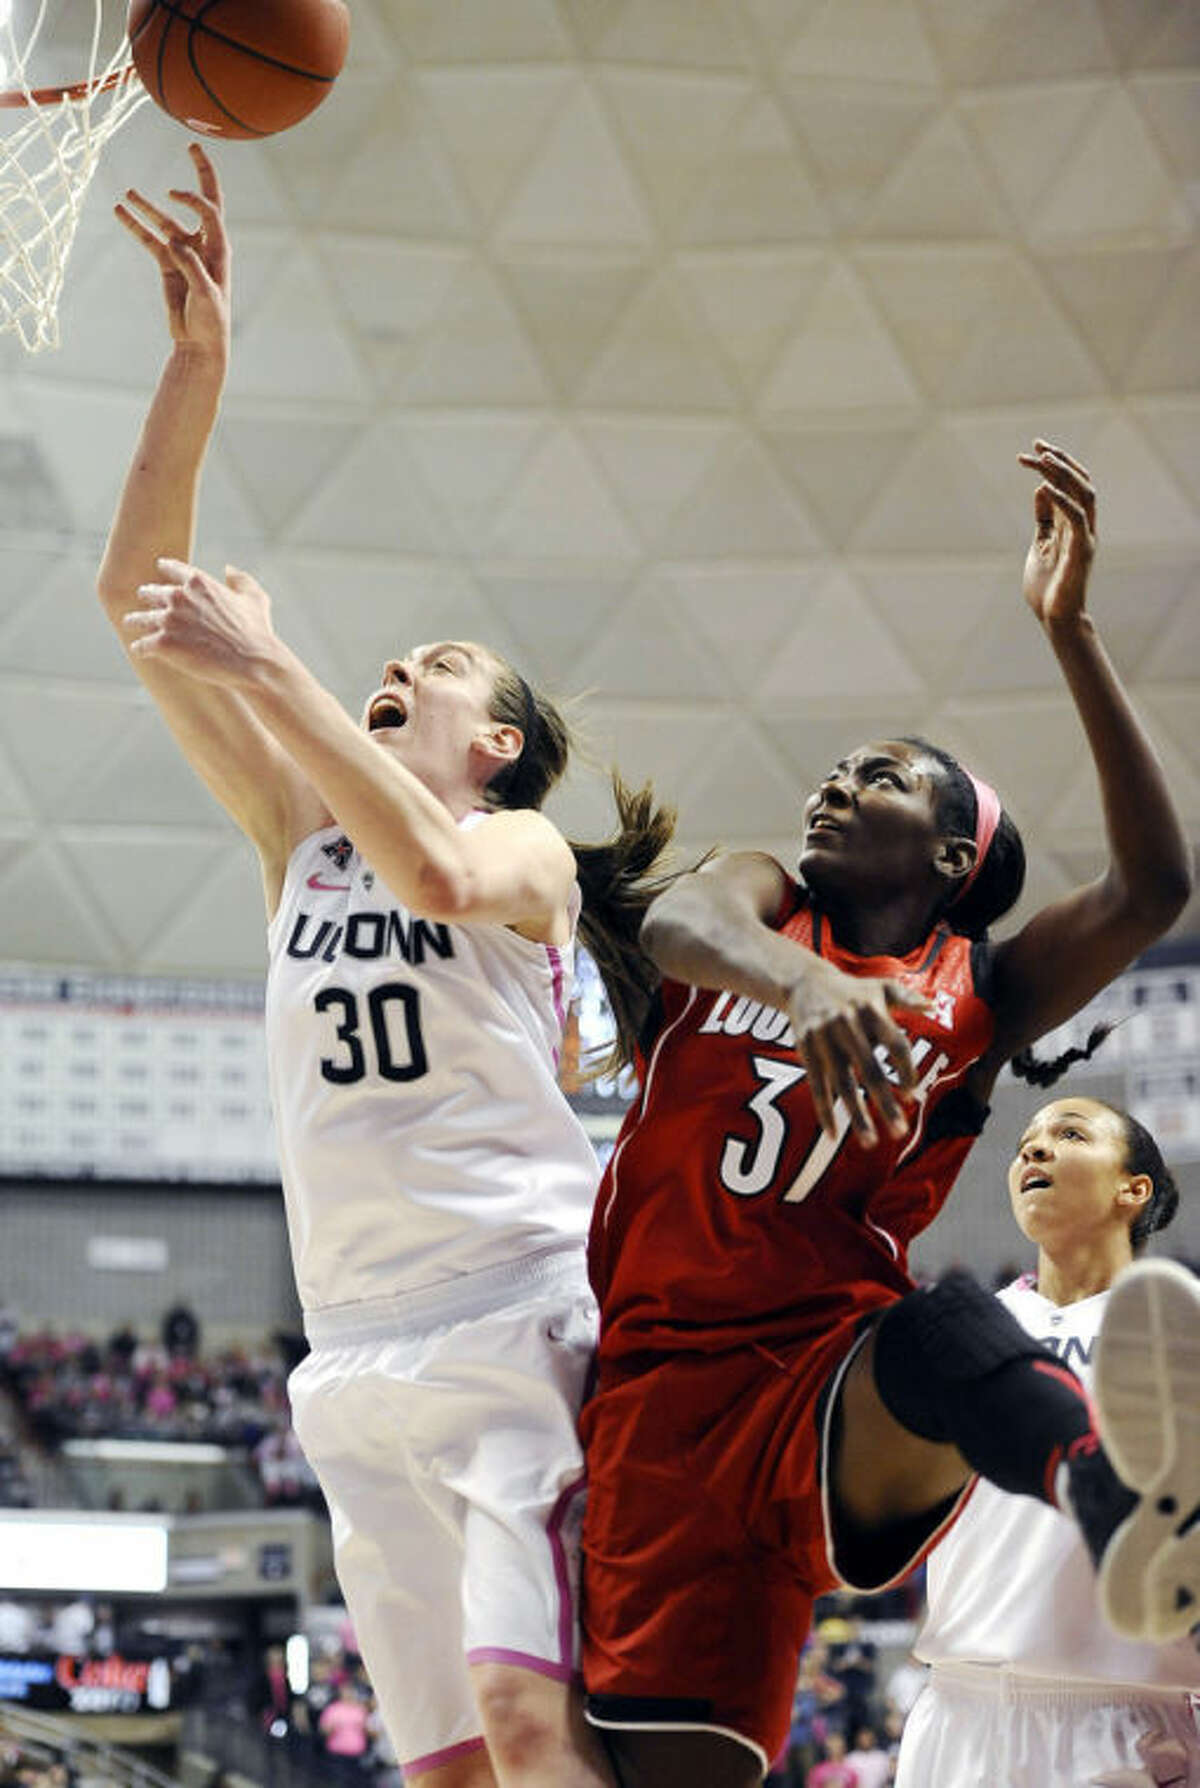 Connecticut's Breanna Stewart, left, and Louisville's Asia Taylor, battle for a rebound during the second half of an NCAA women's college basketball game, Sunday, Feb. 9, 2014, in Storrs, Conn. Connecticut won 81-64. (AP Photo/Jessica Hill)